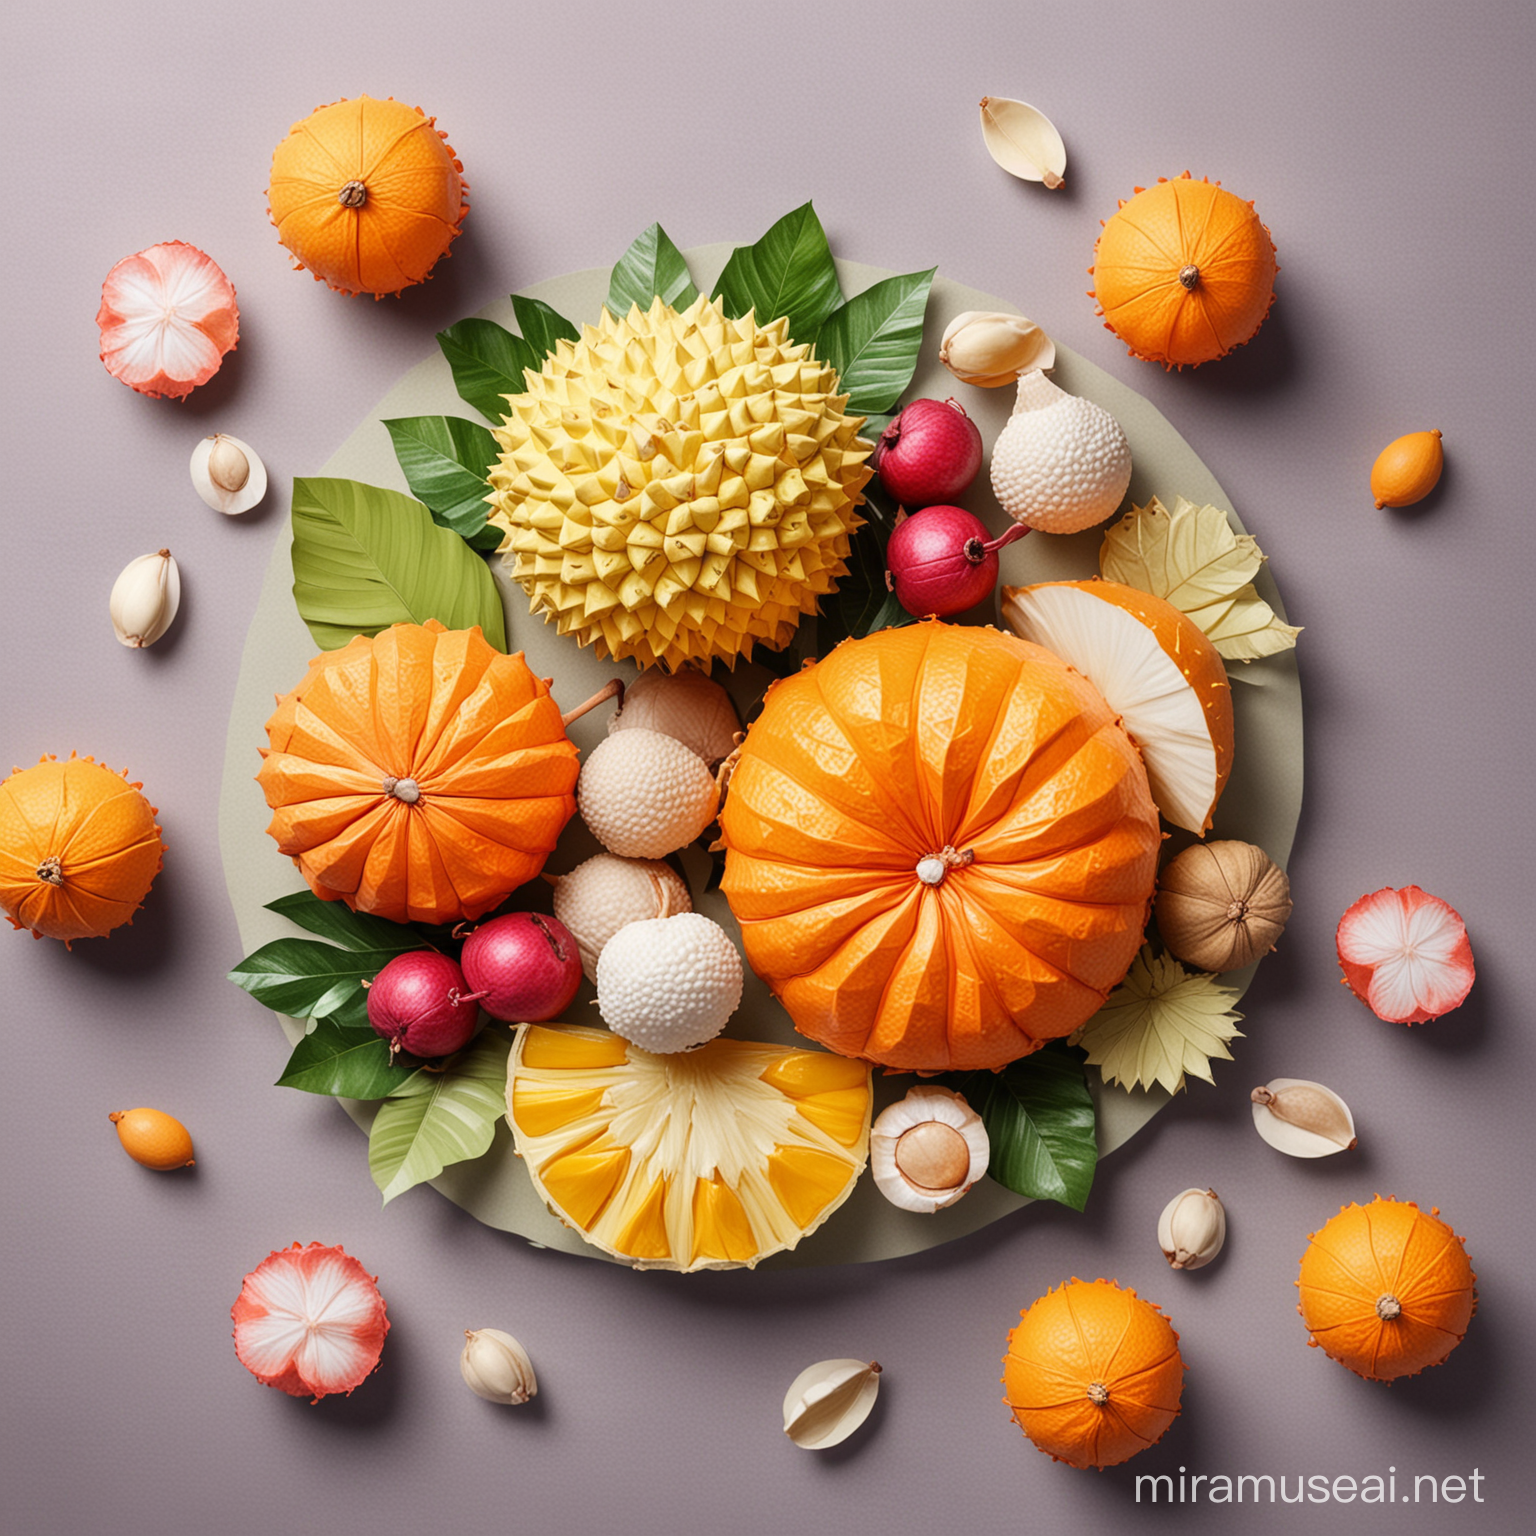 fruits abstract paper art with orange, durian, pomelo, Lychee, longan, Mangosteen, 